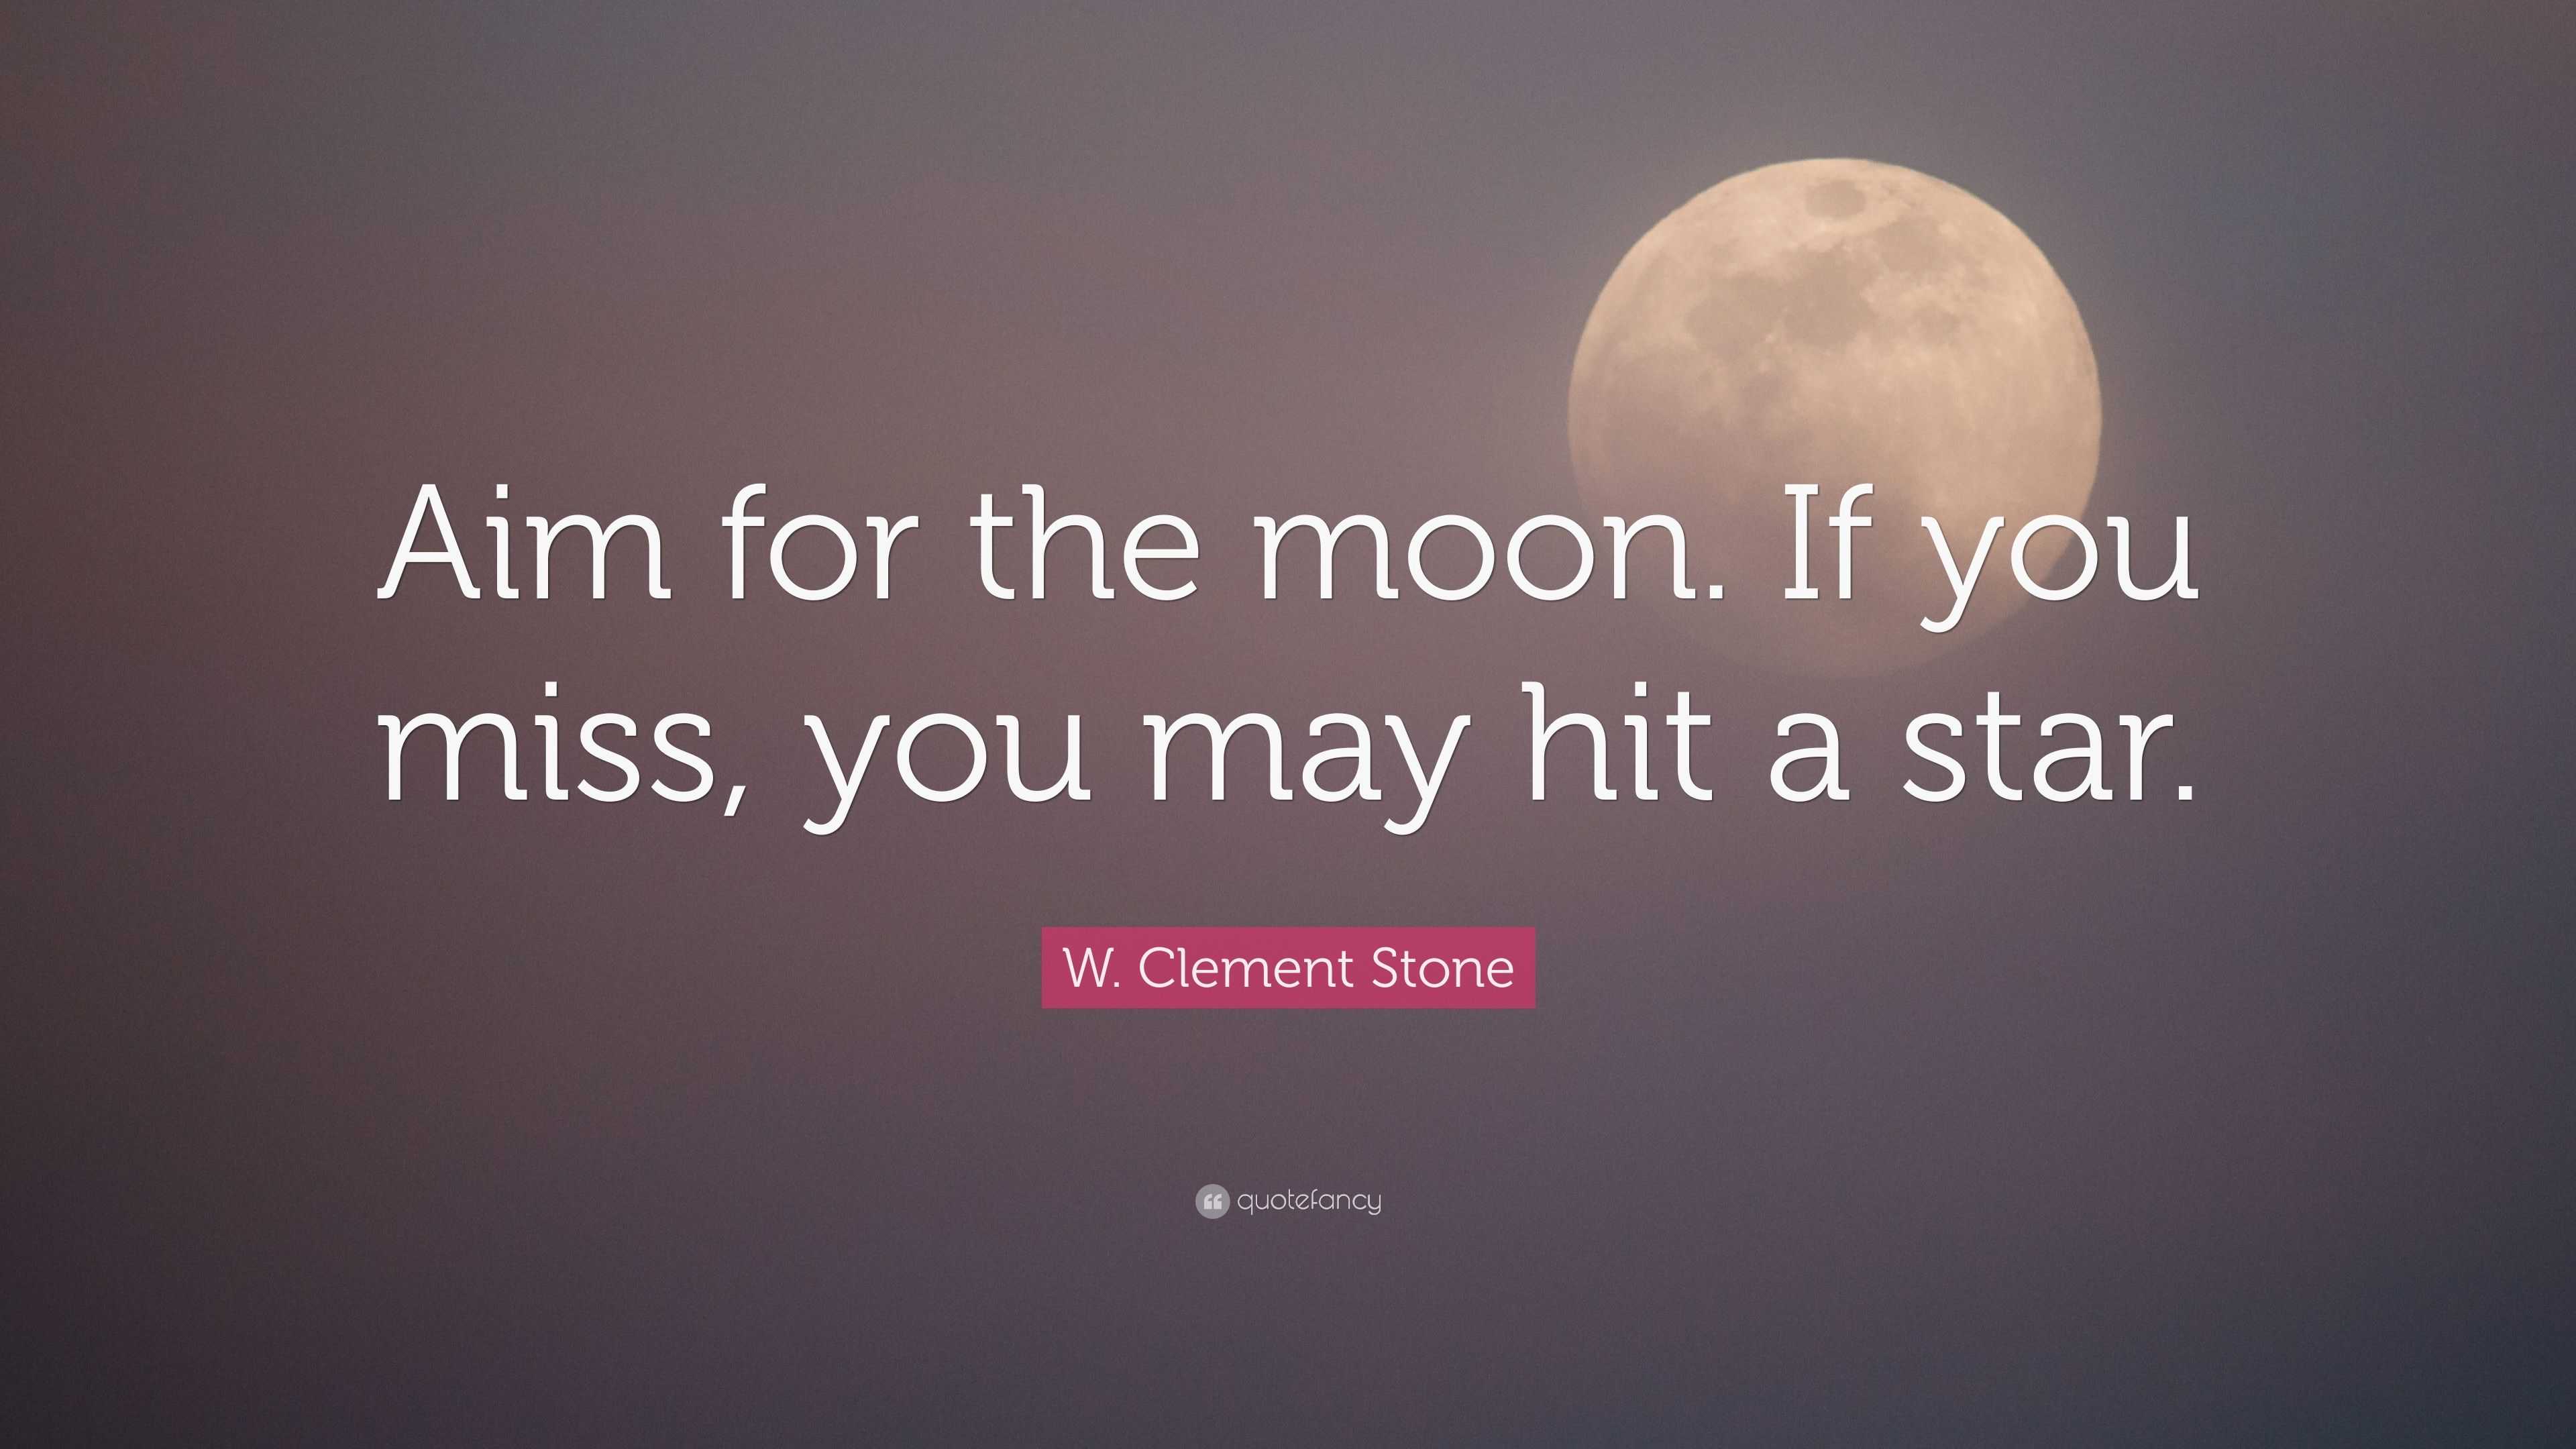 W. Clement Stone Quote: "Aim for the moon. If you miss ...